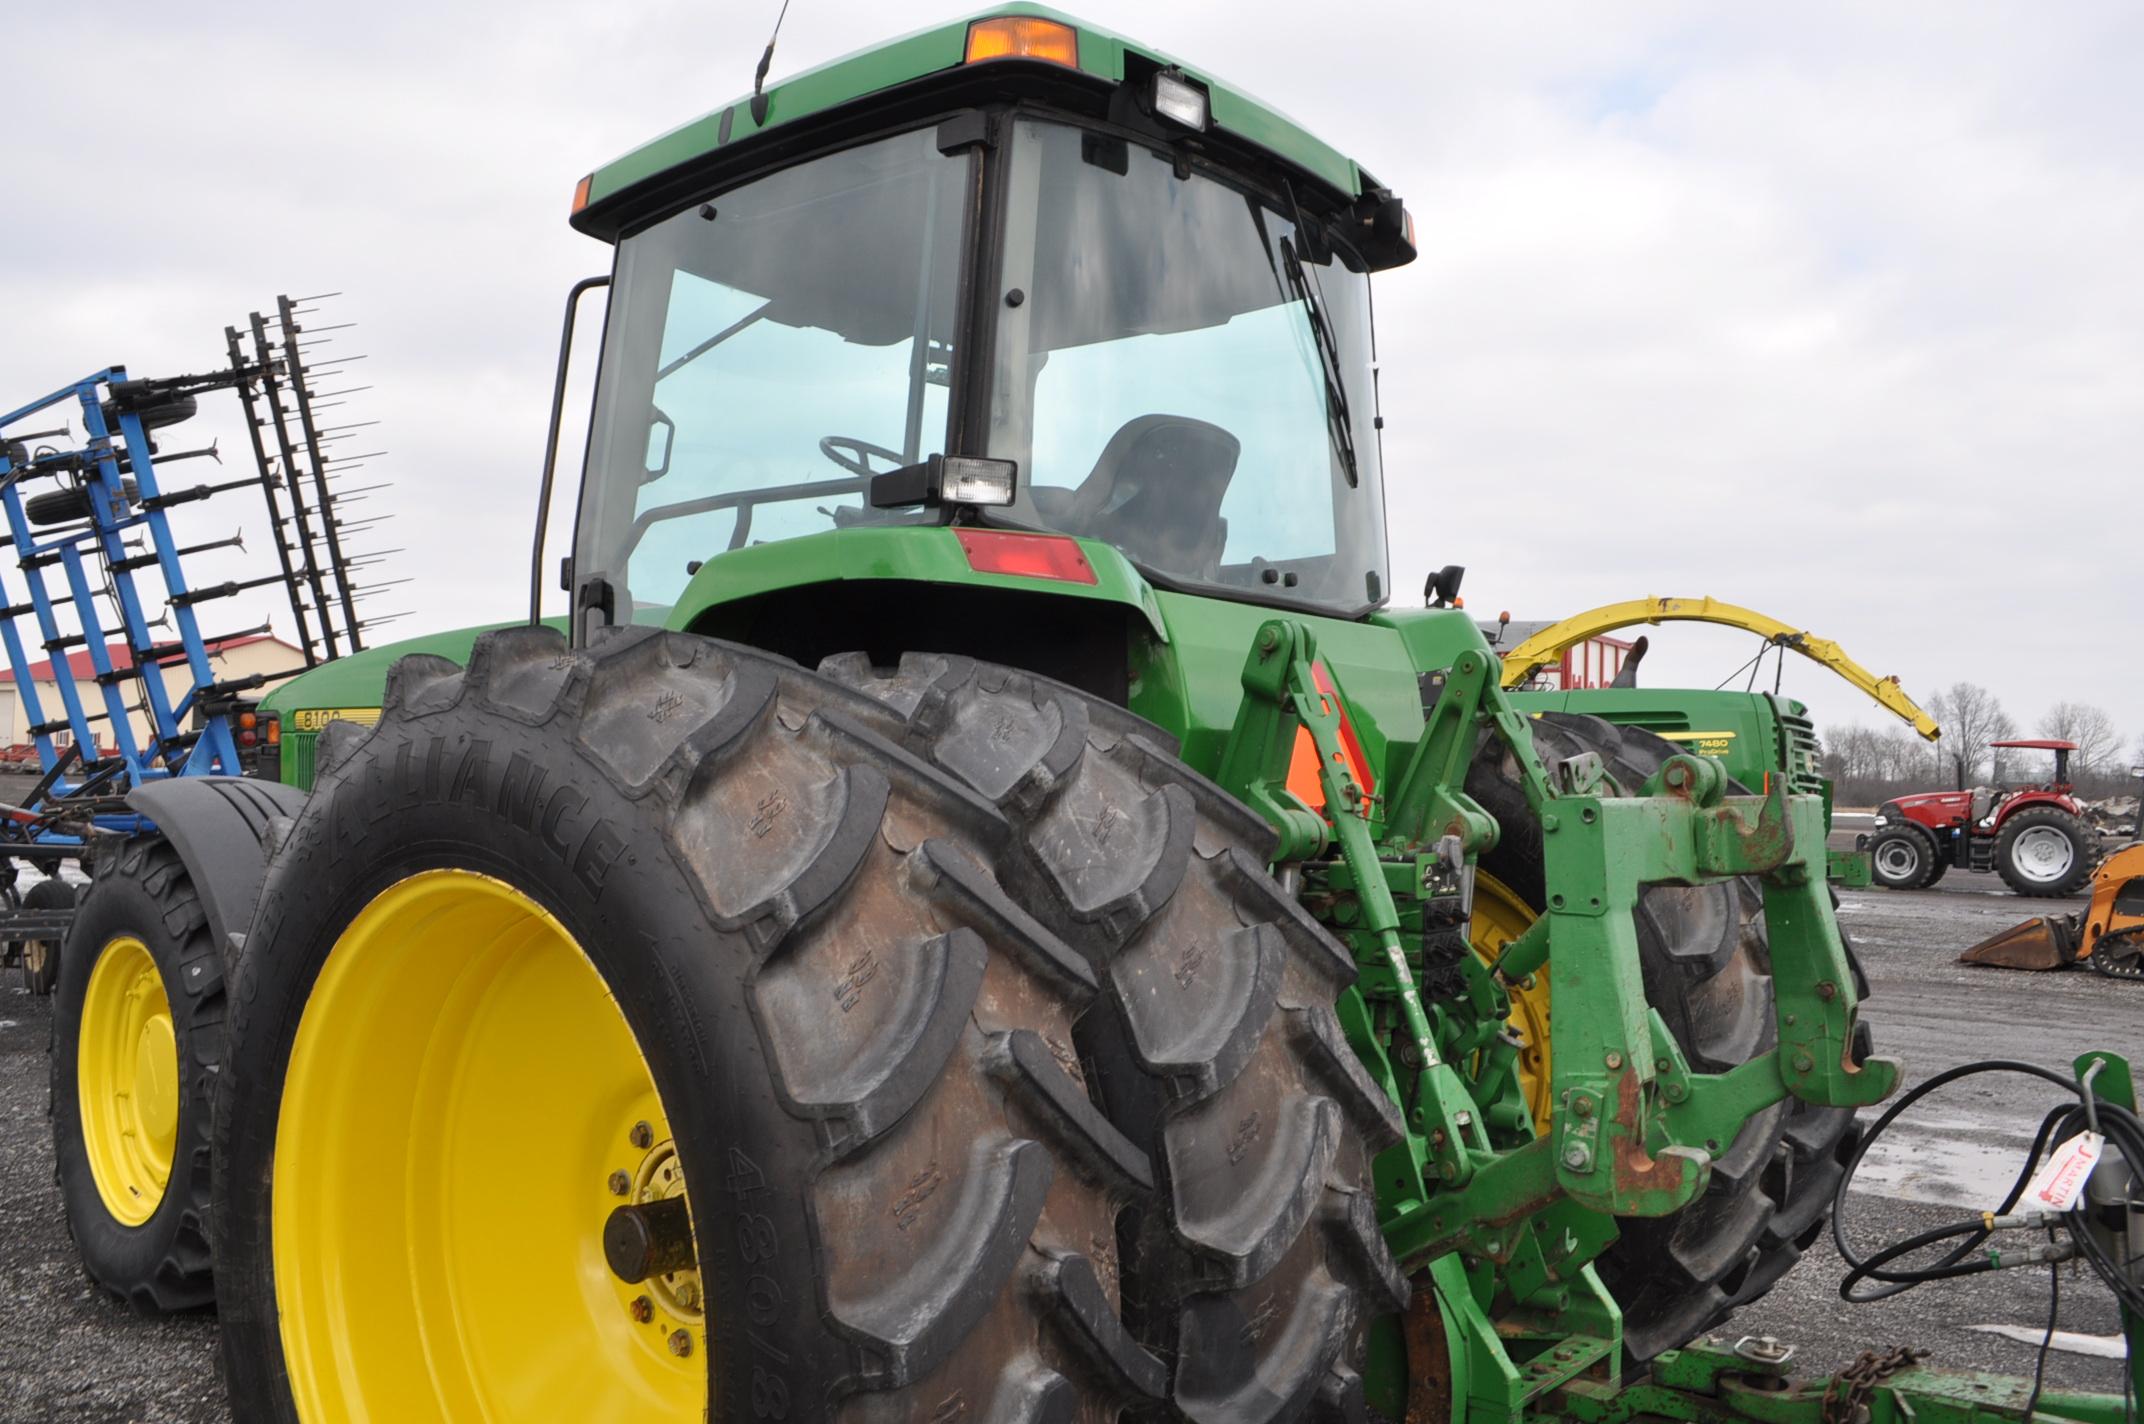 JD 8100 tractor w/ 6,445 original hrs, cab w/ heat/air, 16spd power shift, 4wd, 8 front weights, 100